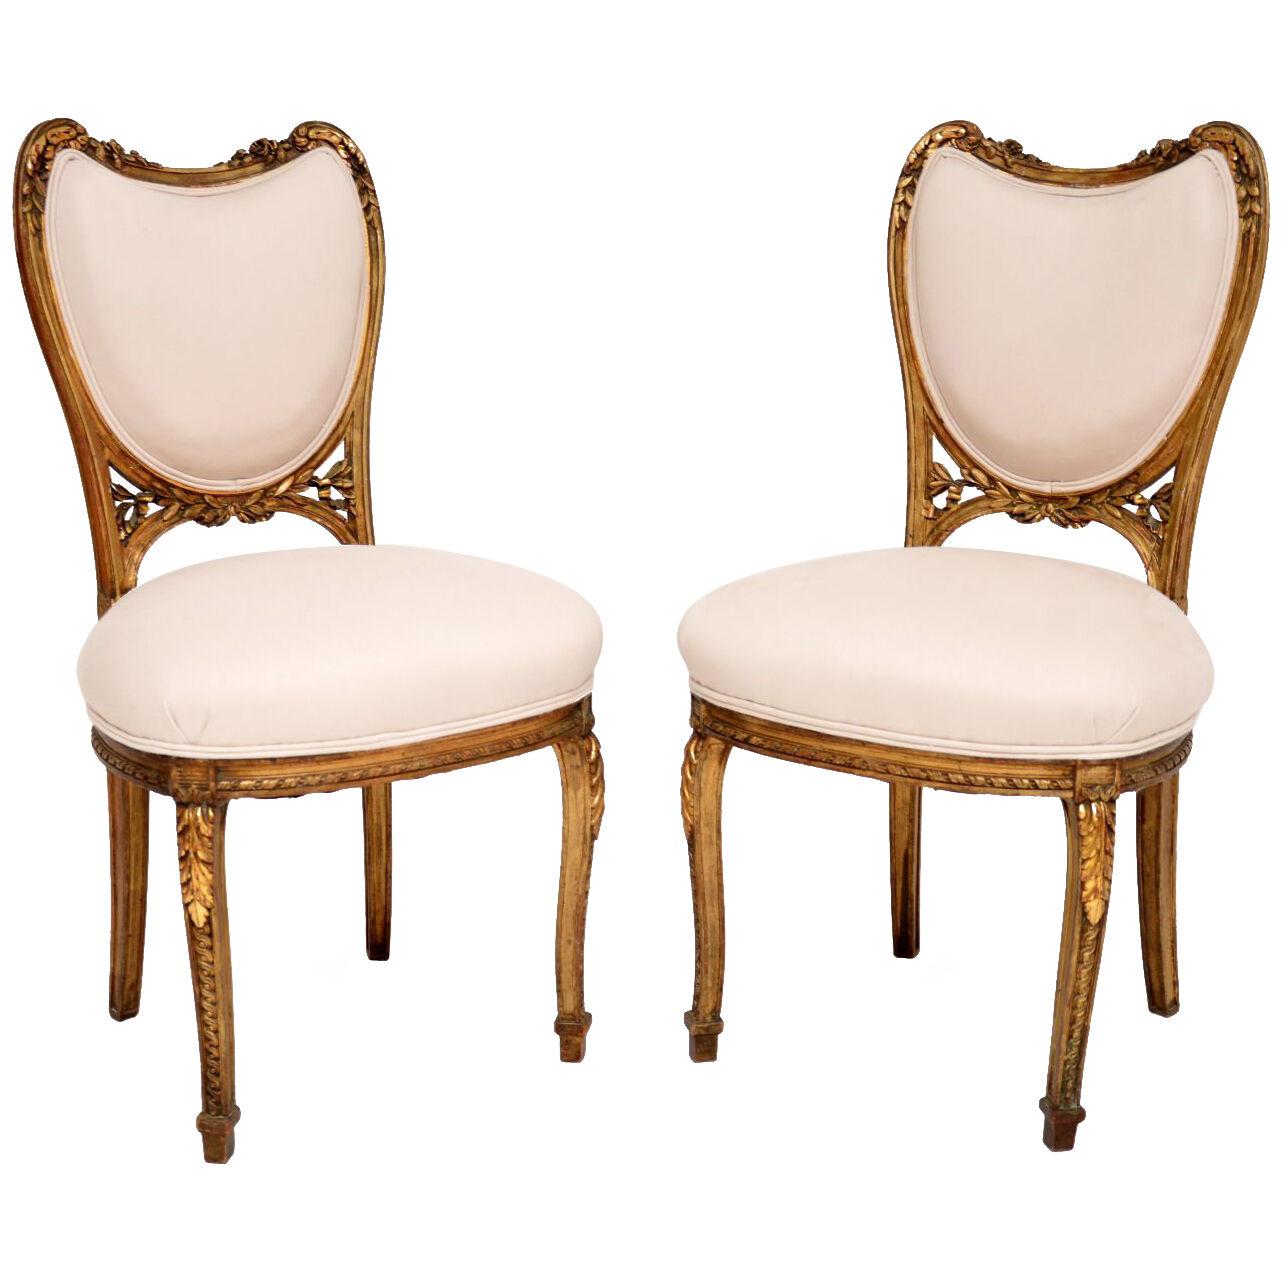 Pair of Antique French Gilt Wood Side Chairs